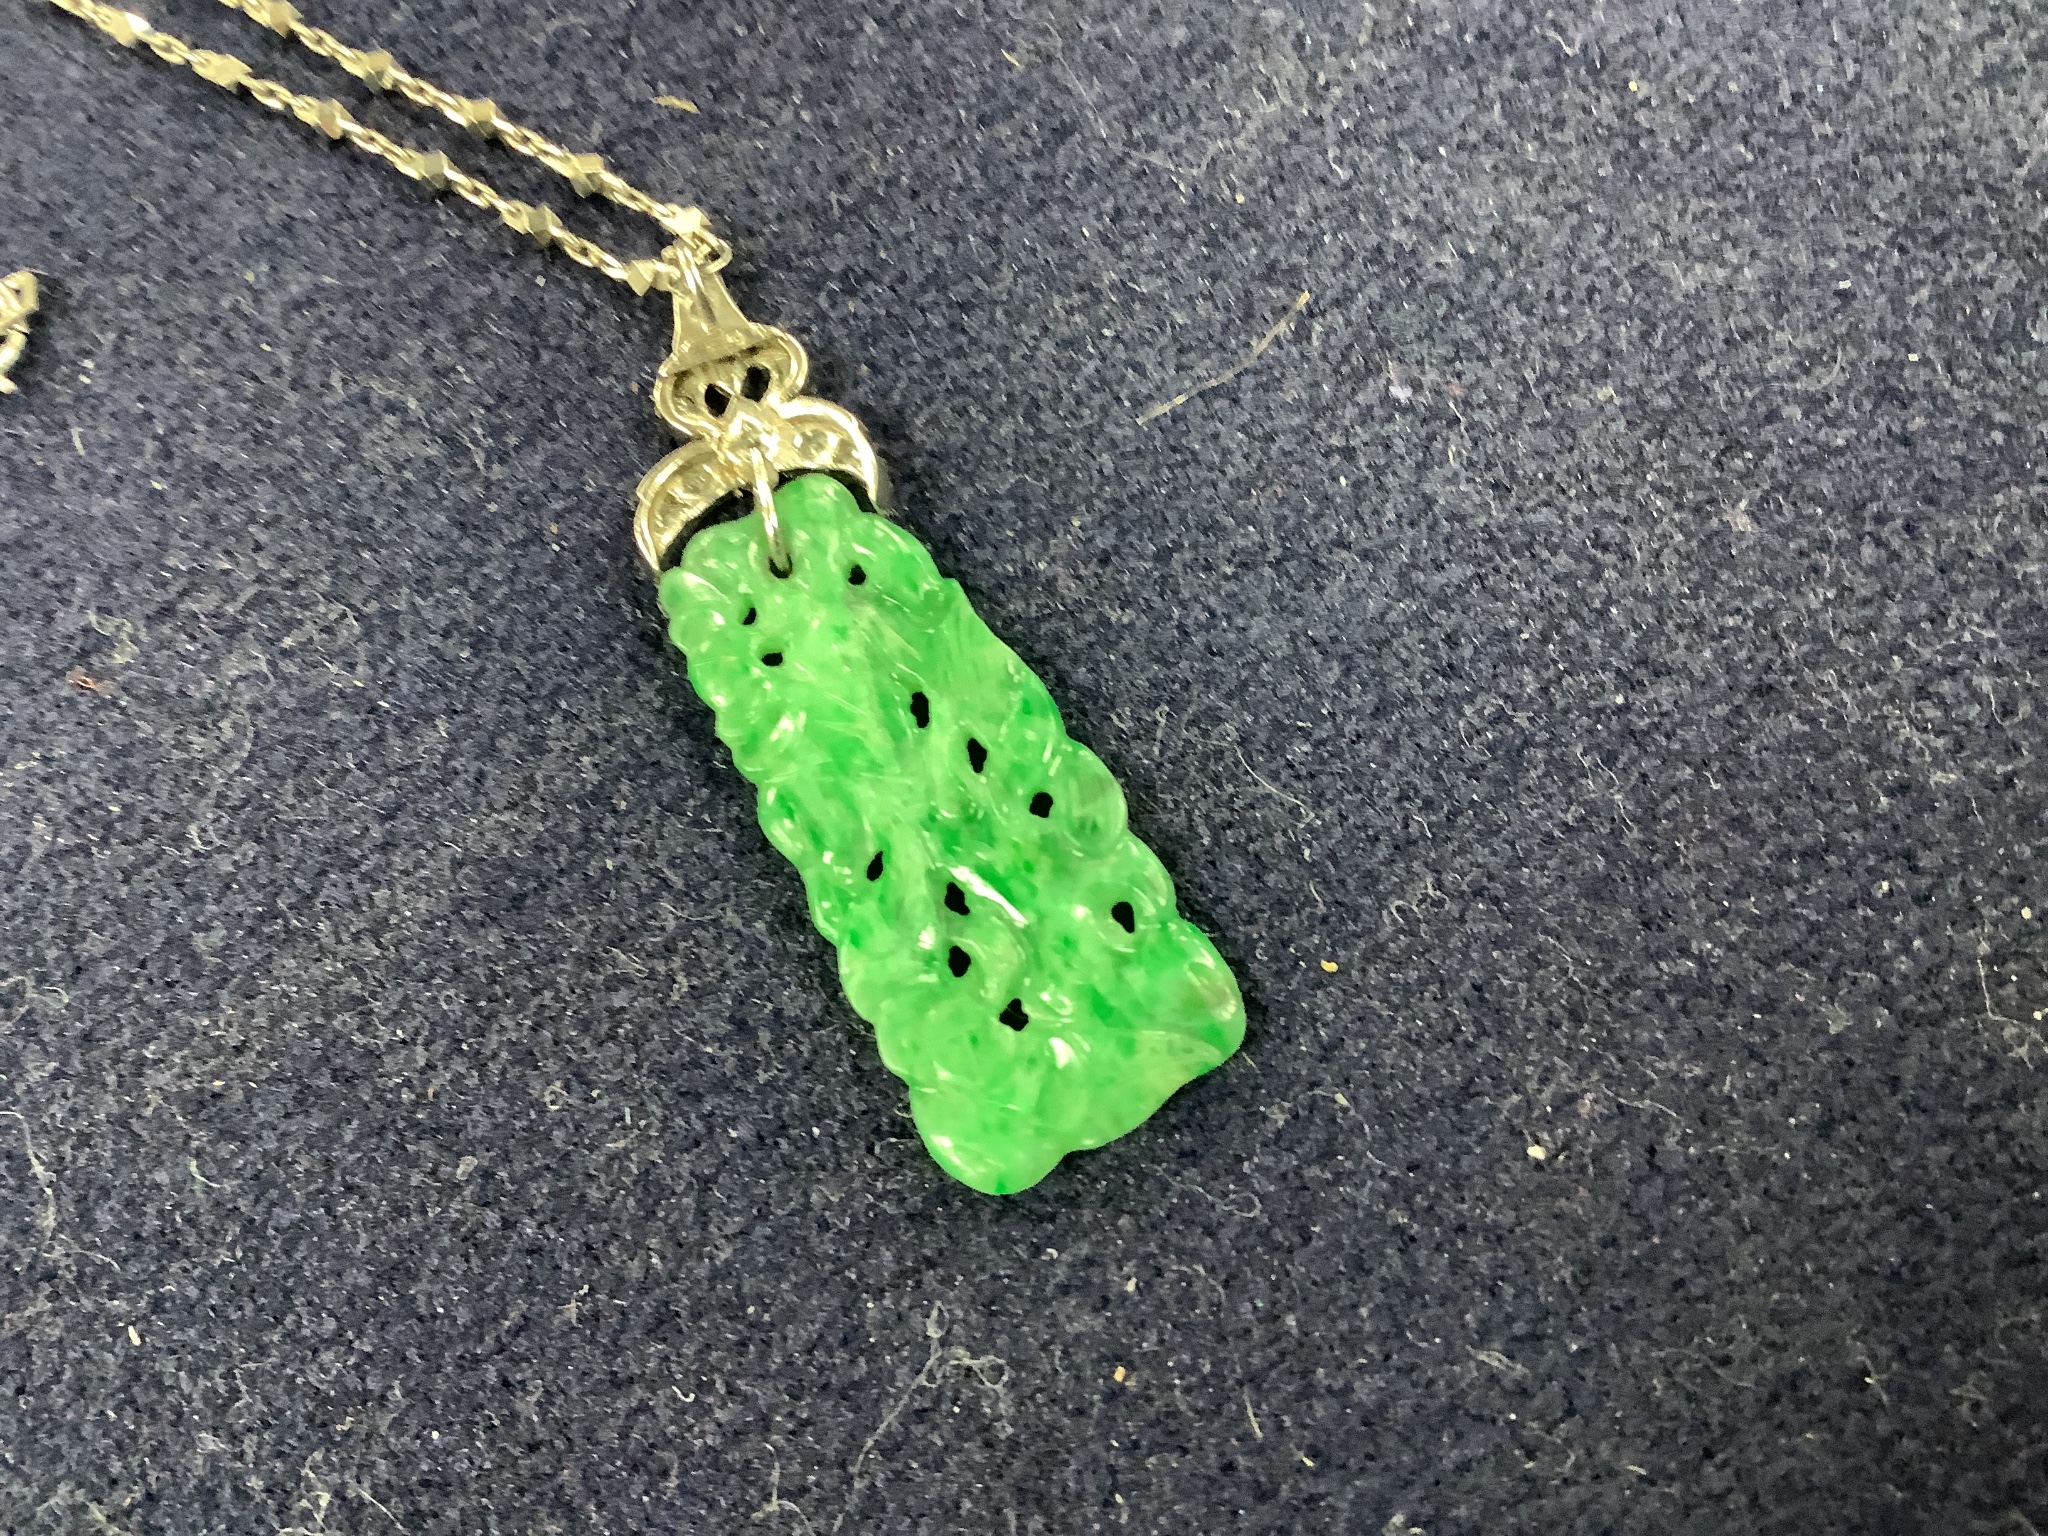 A 1920's white metal and diamond mounted carved jade pendant, numbered 'G 320 1', 4cm, on a platinum fancy link chain, 40cm, gross weight 7.6 grams